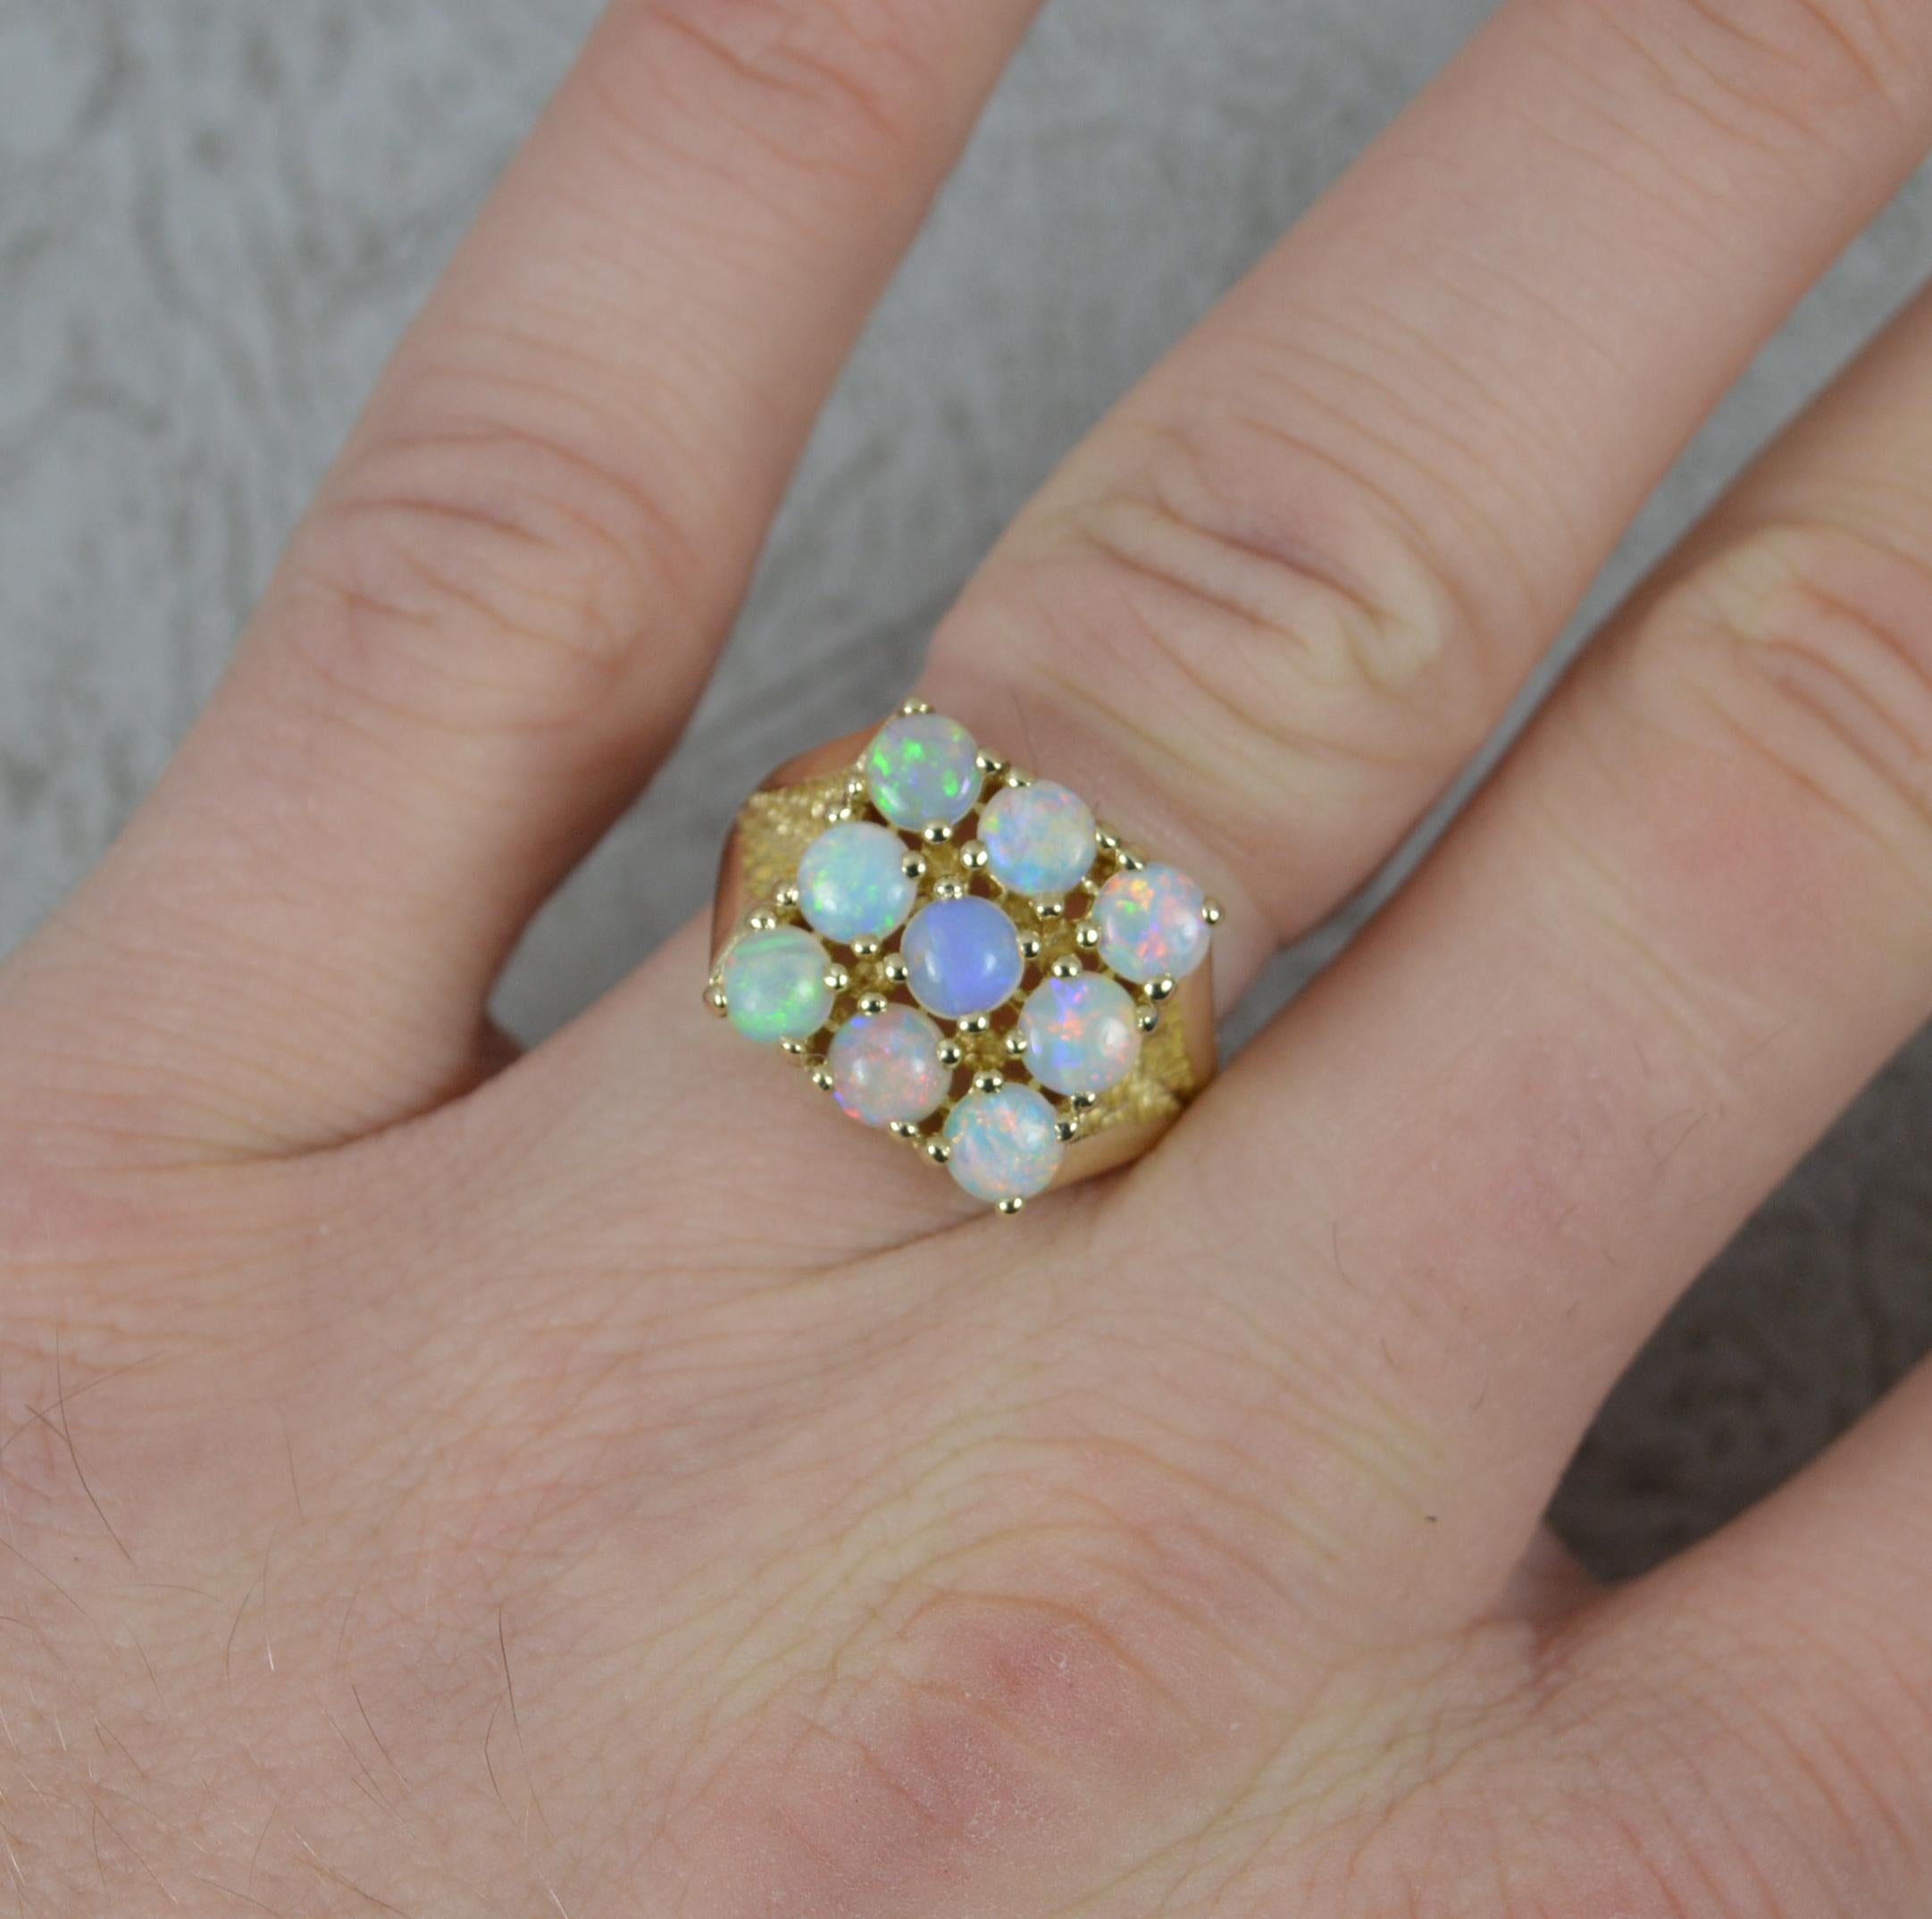 A fine quality opal cluster ring in 9ct gold ring.
Set with nine natural opals in a 3x3 grid.
13mm x 13mm head.

Condition ; Very Good. Clean, solid band. Well set stones, issue free. Please view photographs.
Size ; M 1/2 UK, 6 1/4 US
Weight ; 5.0